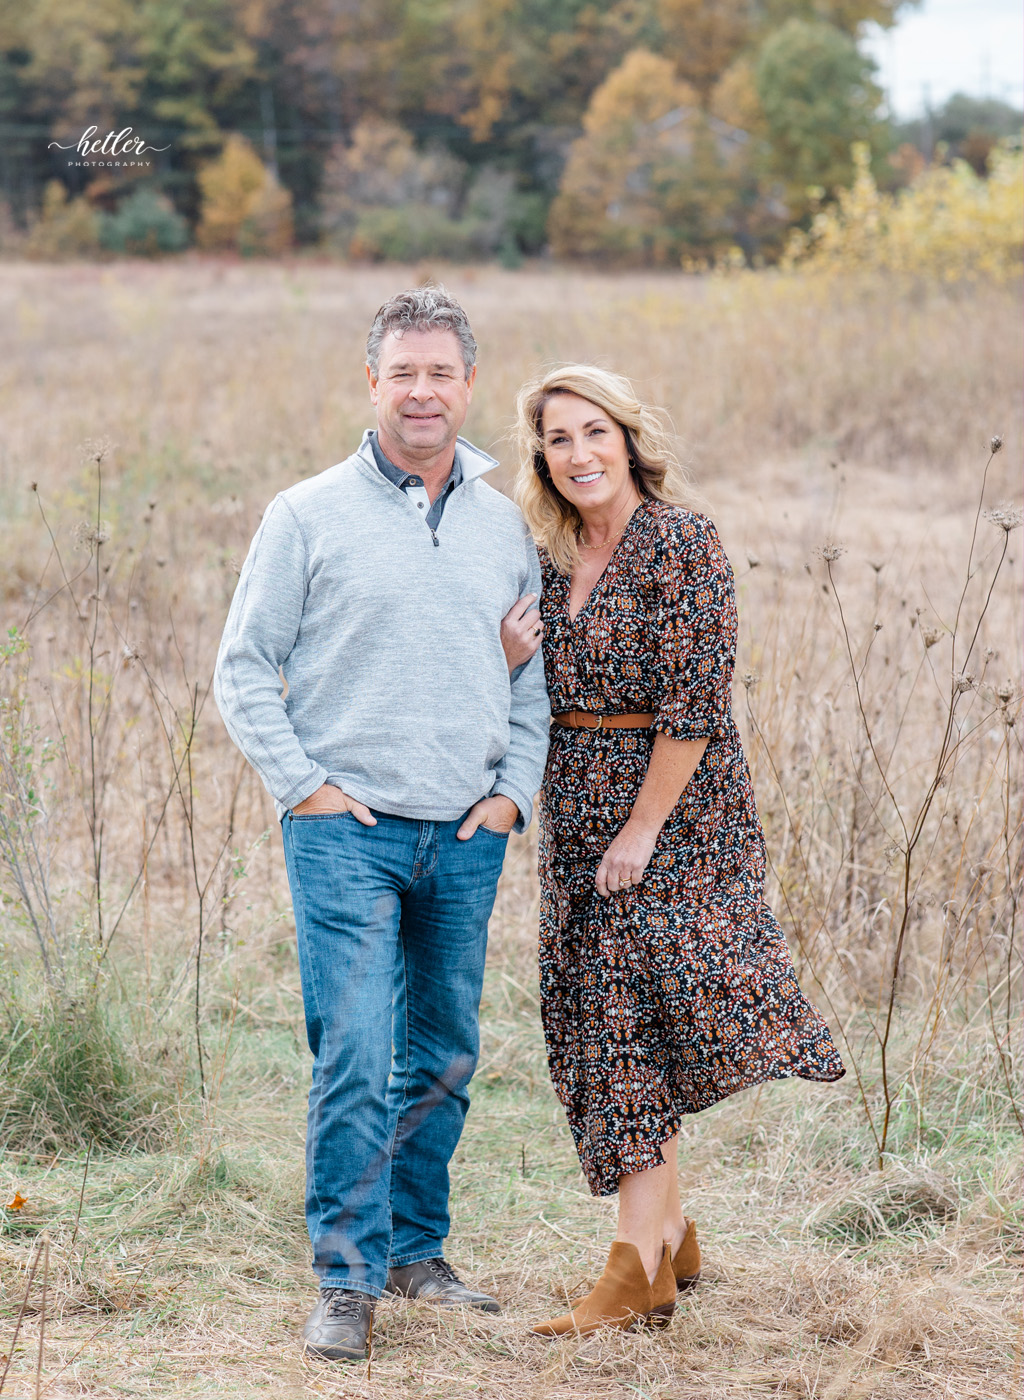 Fall family photo session at Luton Park in Rockford Michigan